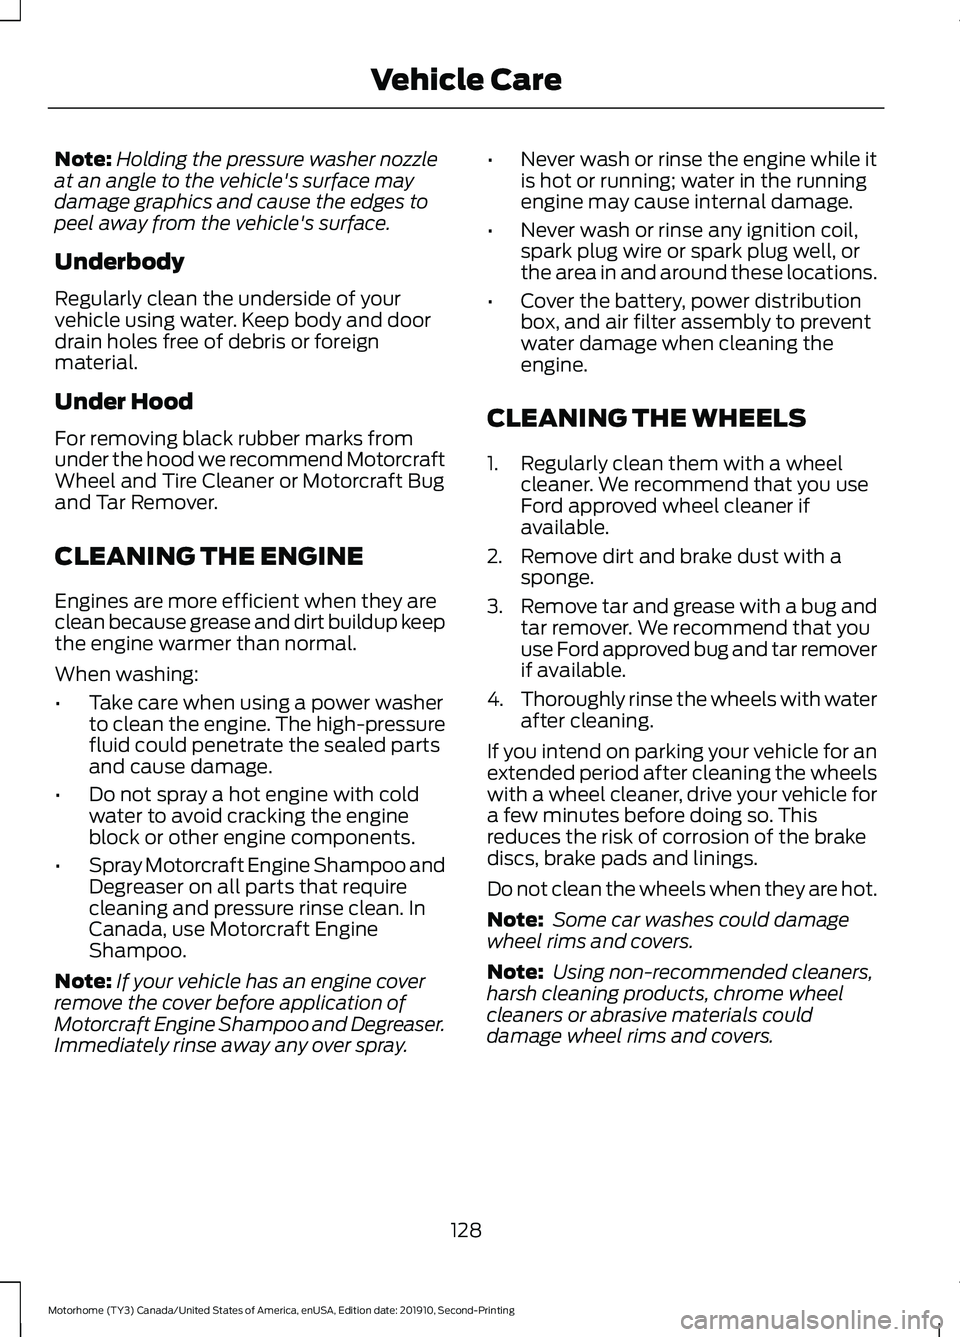 FORD F-59 2020  Owners Manual Note:
Holding the pressure washer nozzle
at an angle to the vehicle's surface may
damage graphics and cause the edges to
peel away from the vehicle's surface.
Underbody
Regularly clean the und